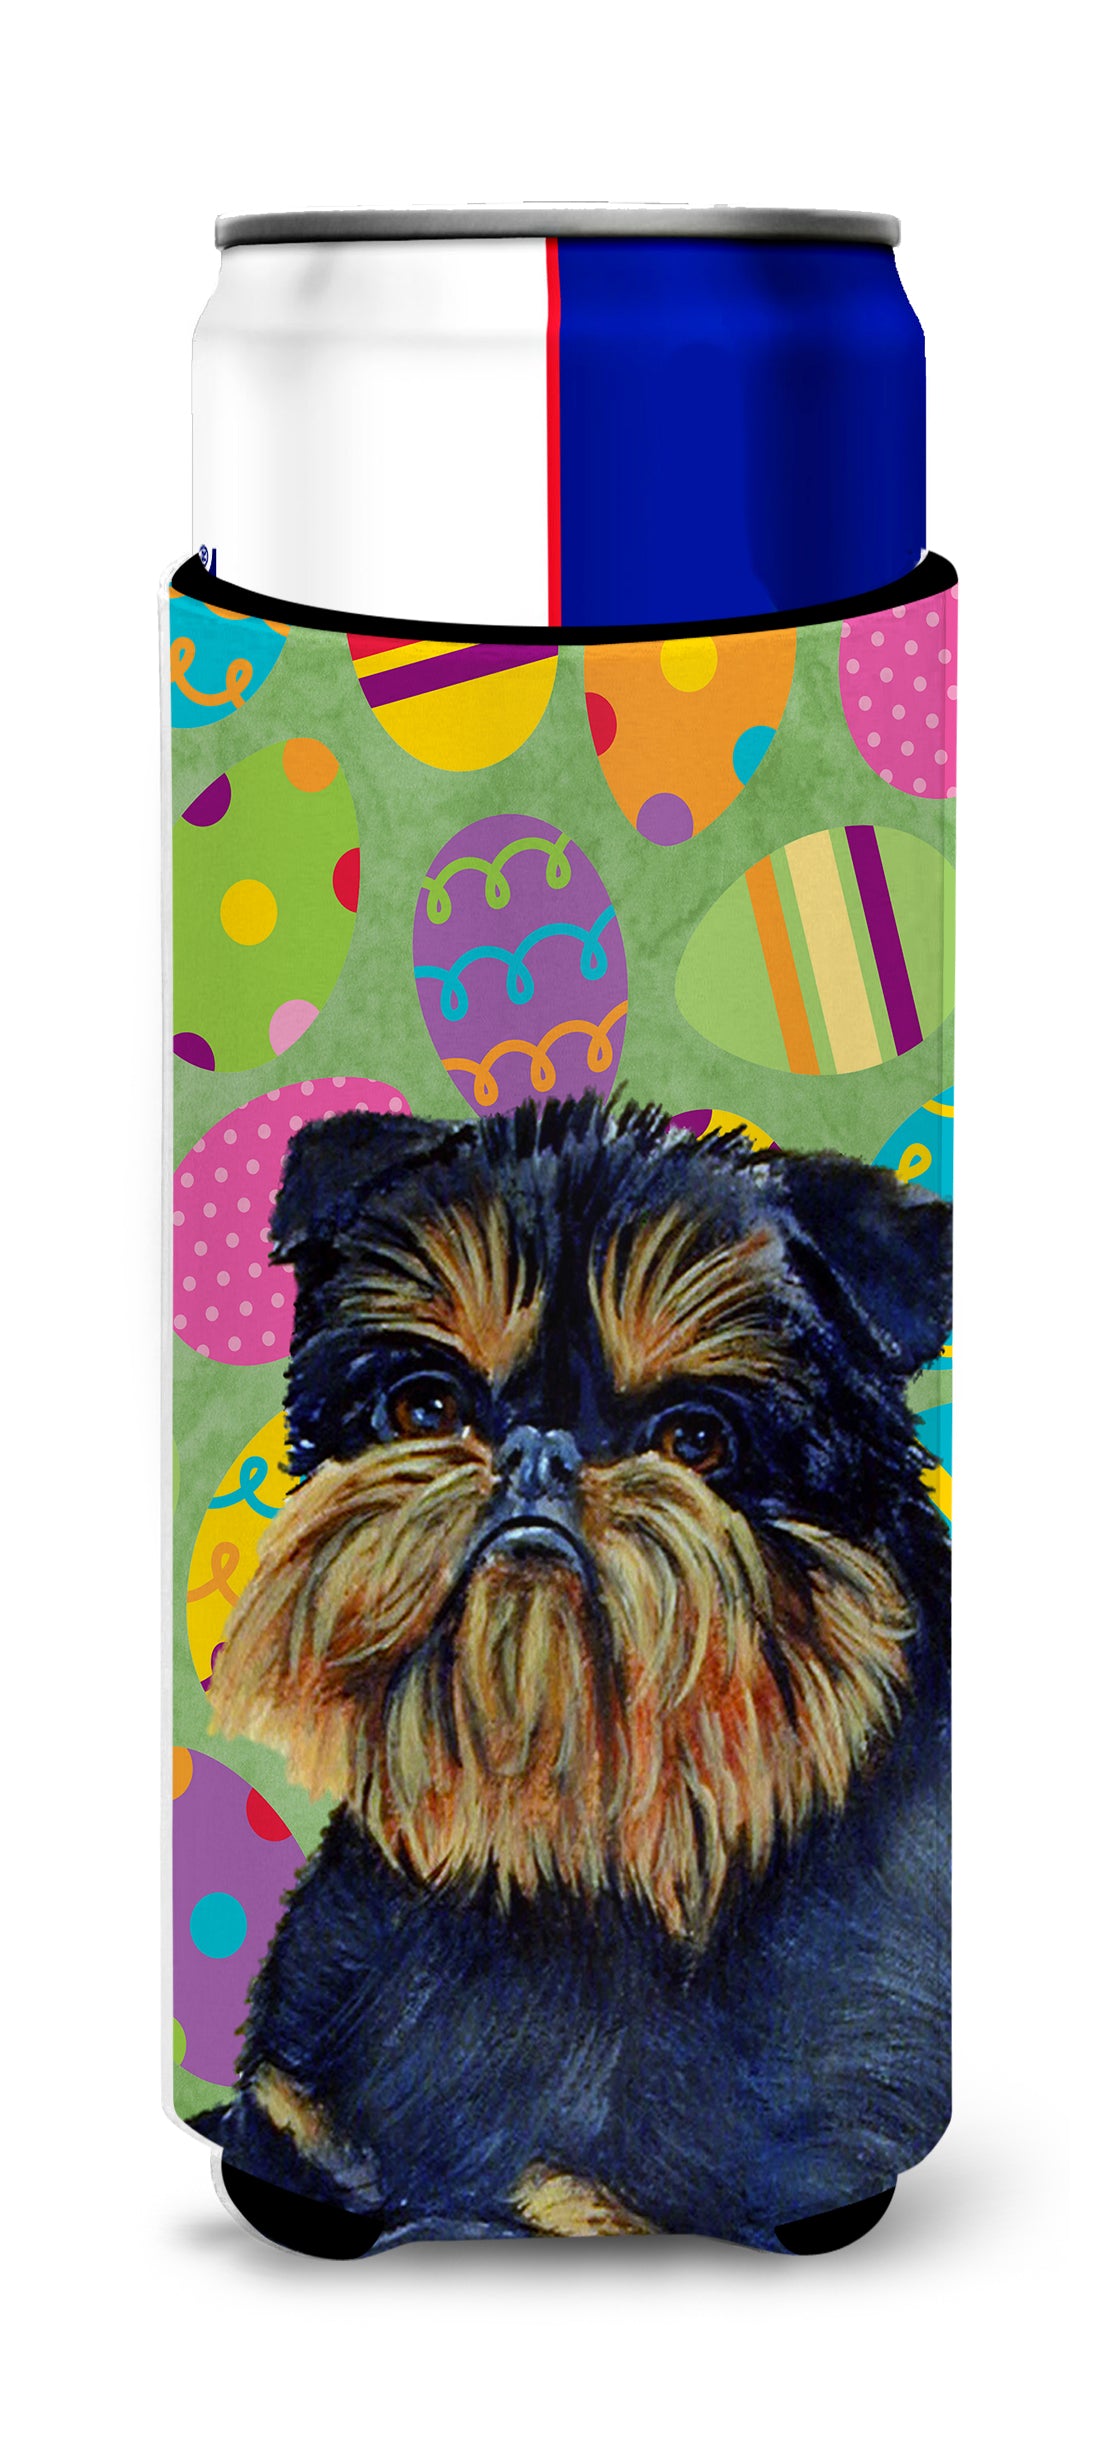 Brussels Griffon Easter Eggtravaganza Ultra Beverage Insulators for slim cans LH9433MUK